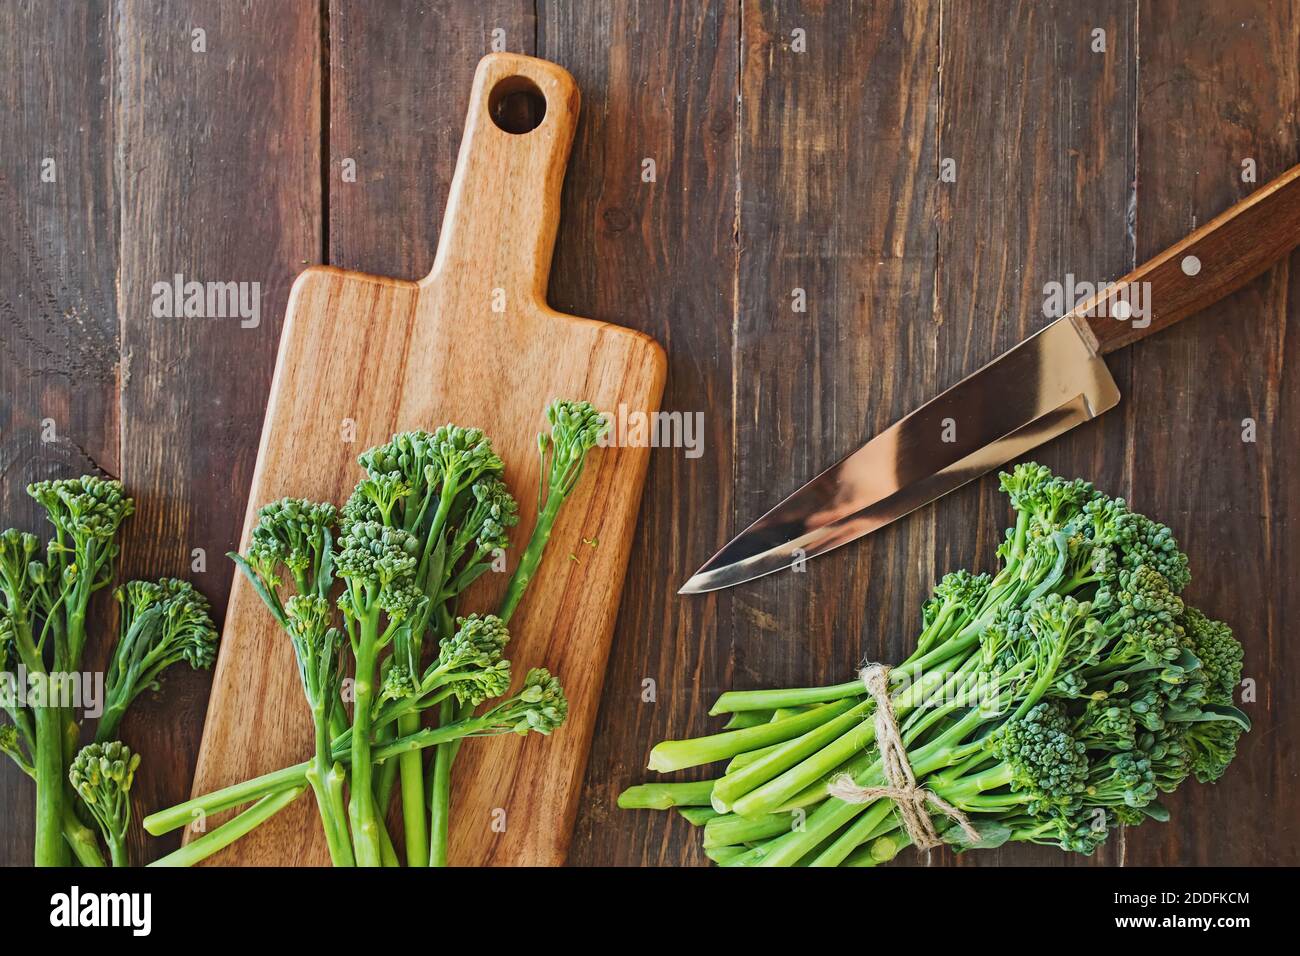 Broccolini vegetable on wooden table Stock Photo